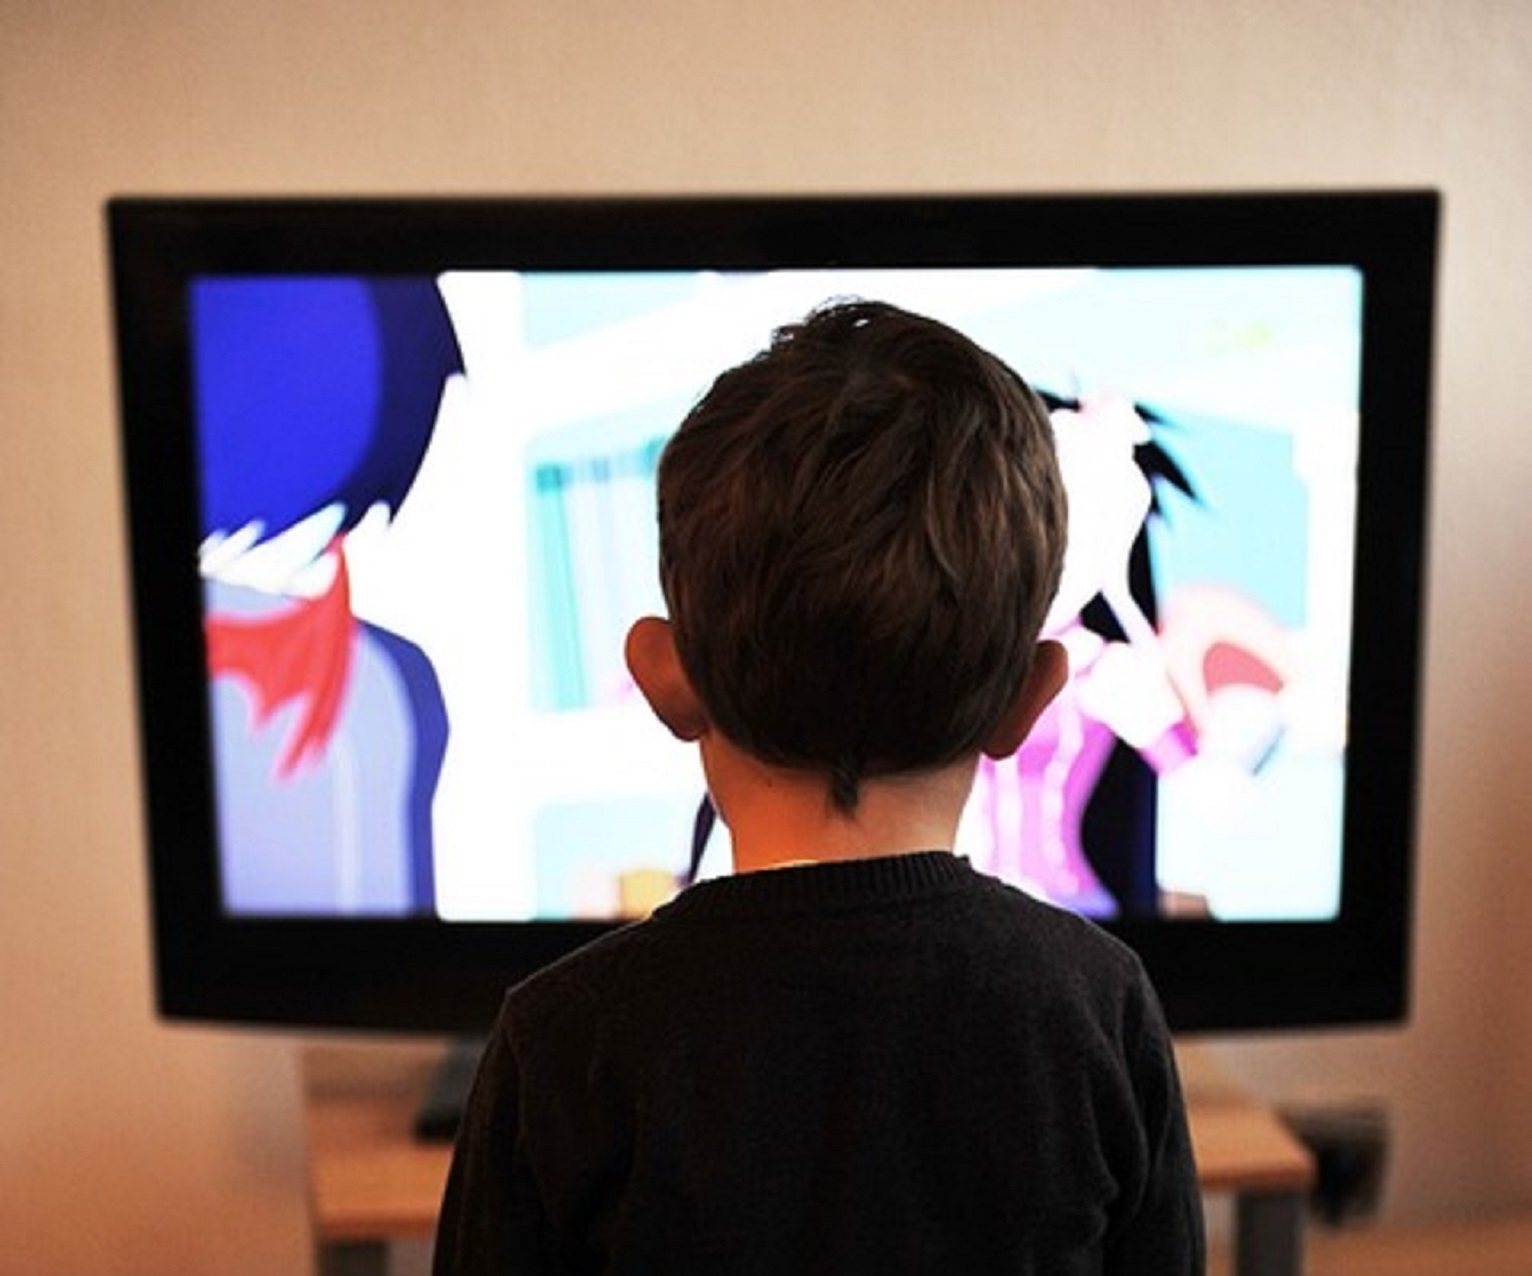 Child in front of the tv